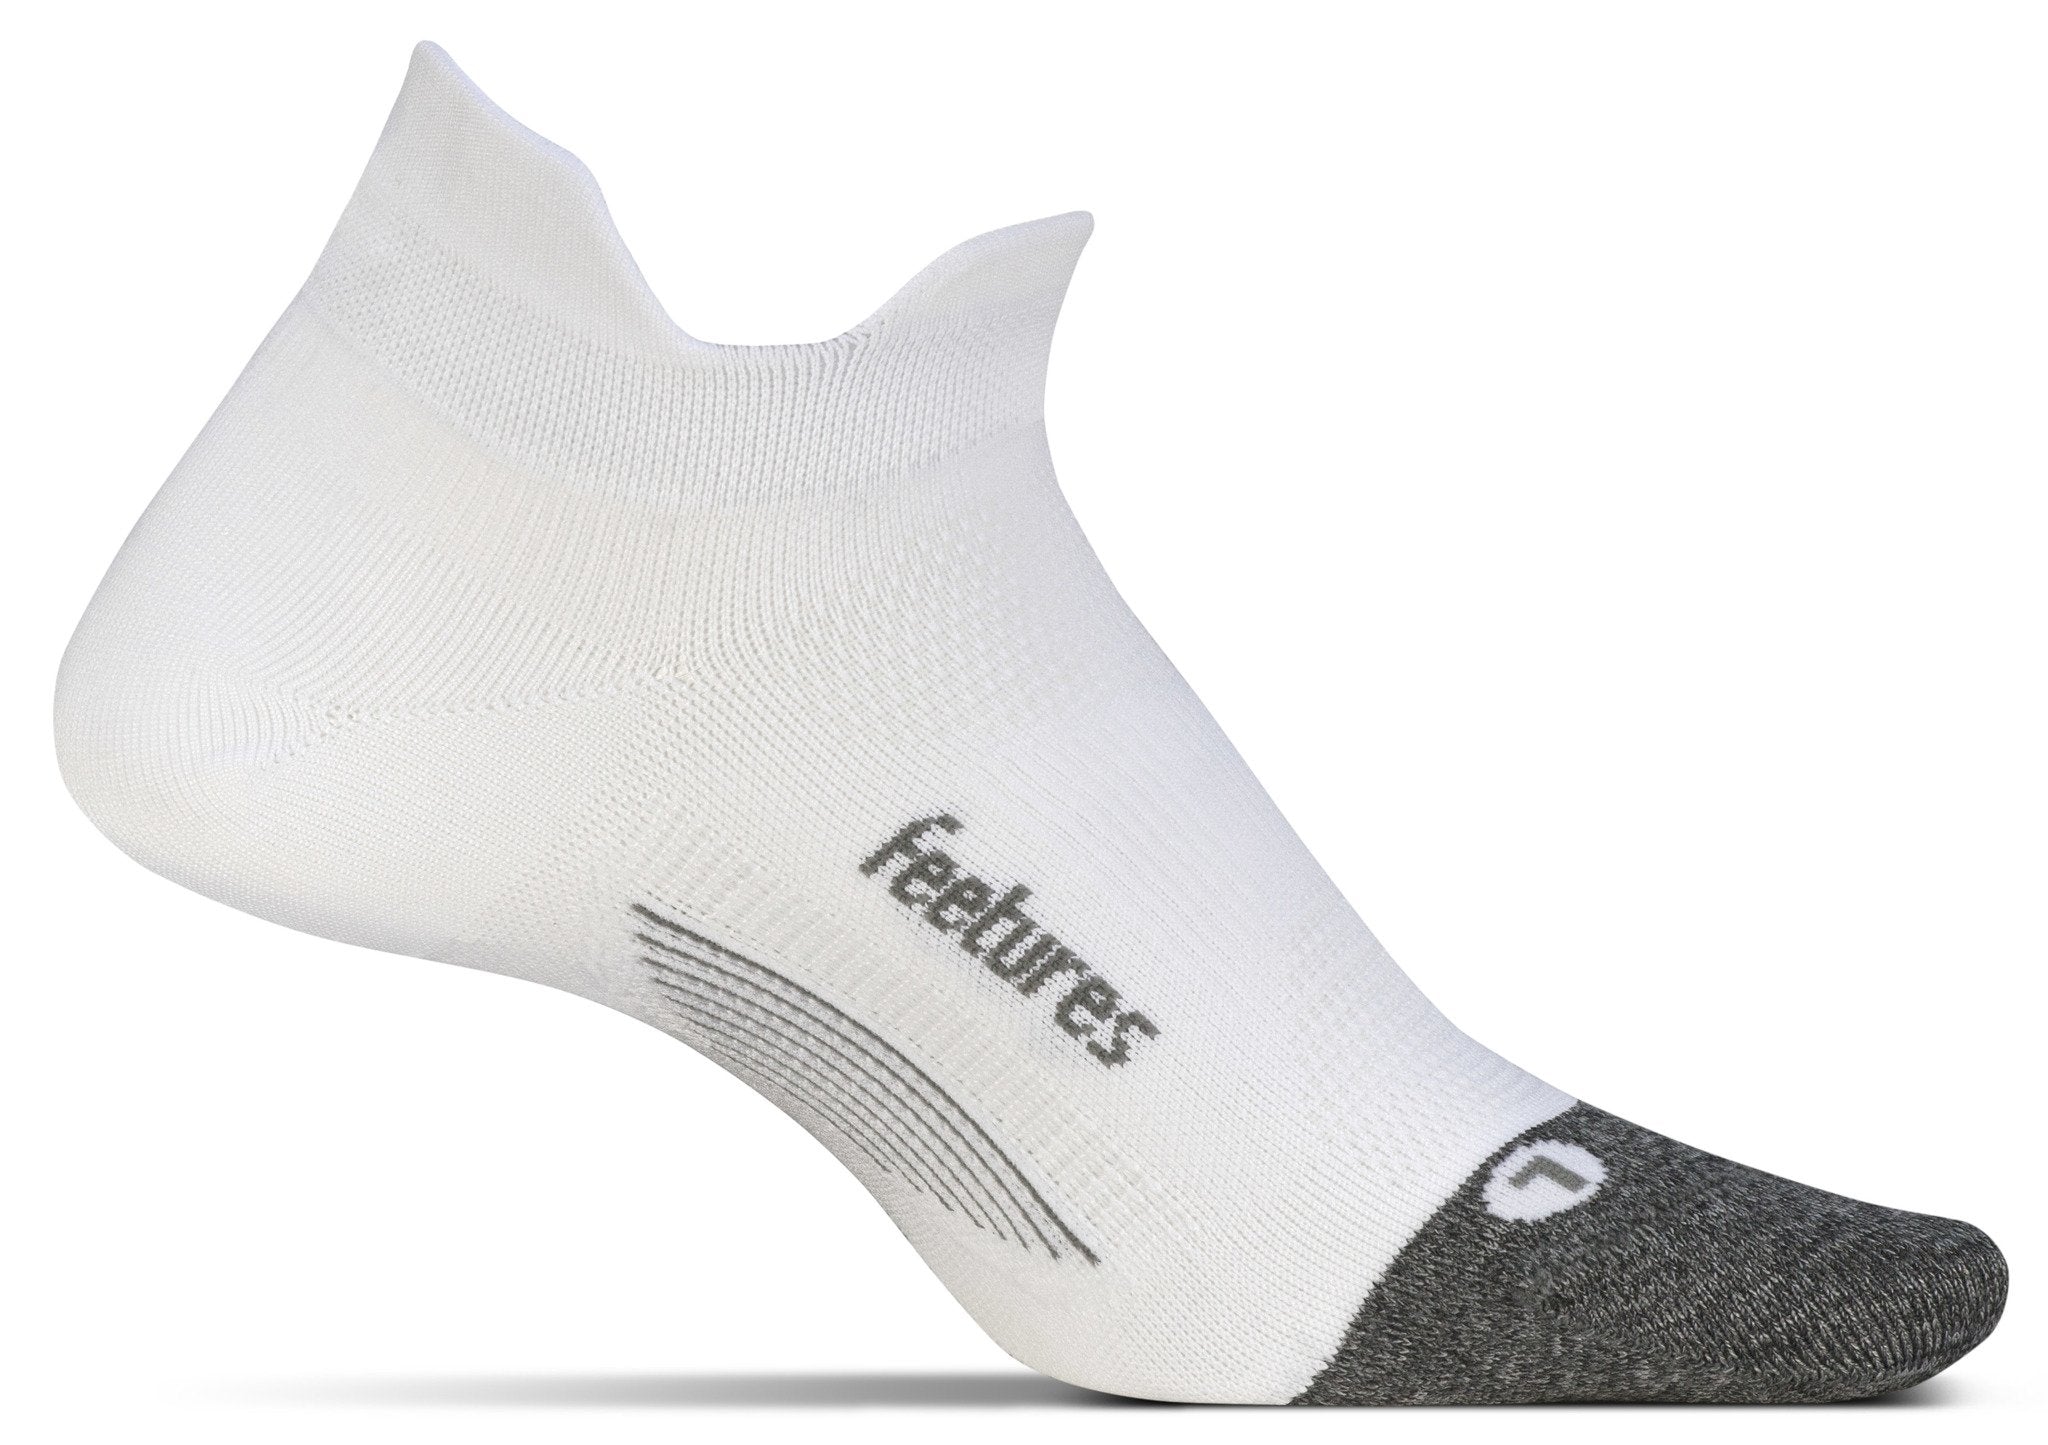 A medial view of the Feetures Elite Light Cushion running sock (left foot) in the color white.